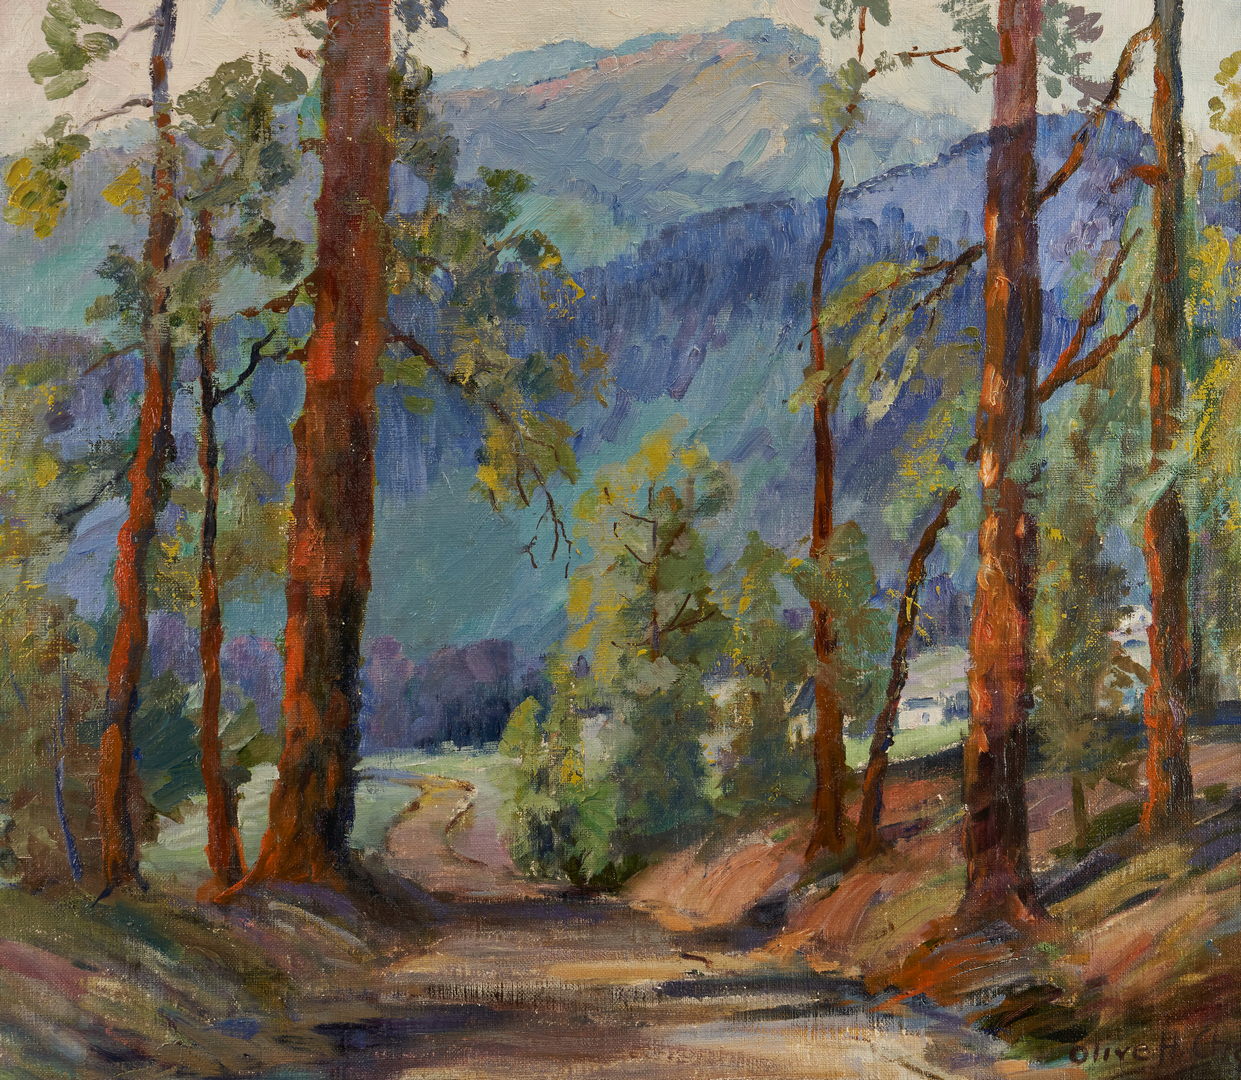 Lot 365: Olive Chaffee O/C Painting, Mountain Landscape